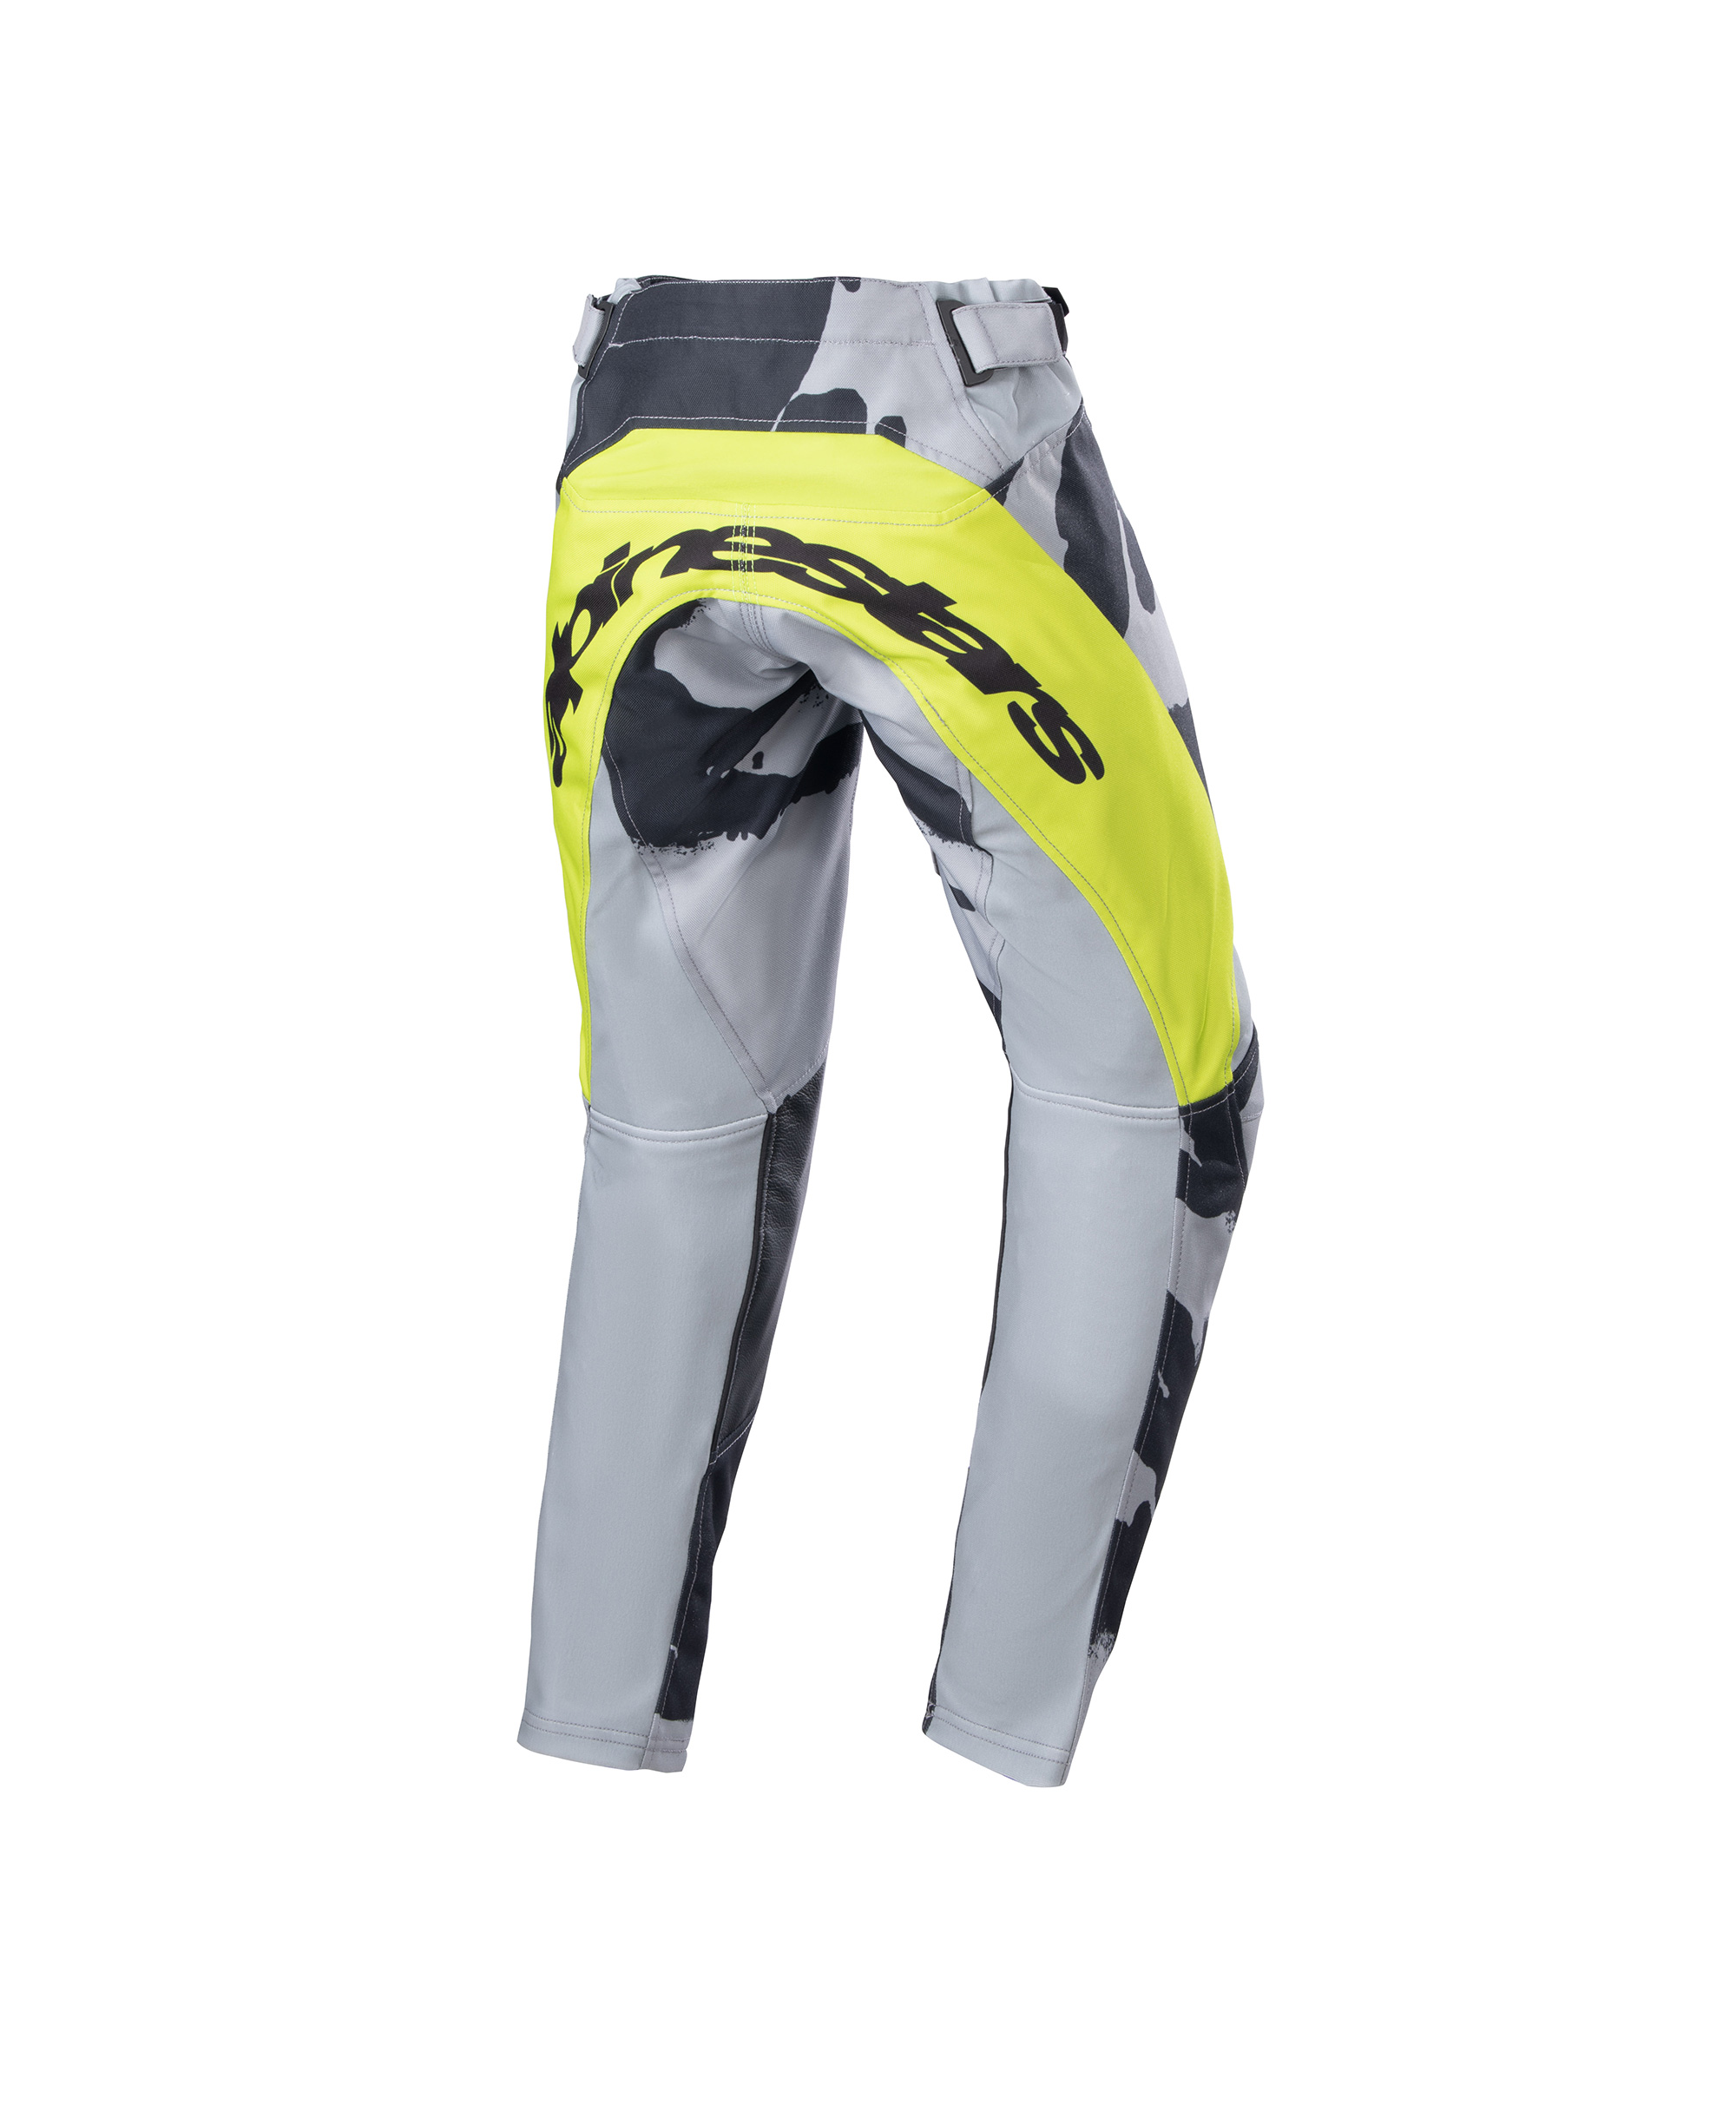 YOUTH RACER TACTICAL PANTS CAST GRAY CAMO YELLOW FLUO